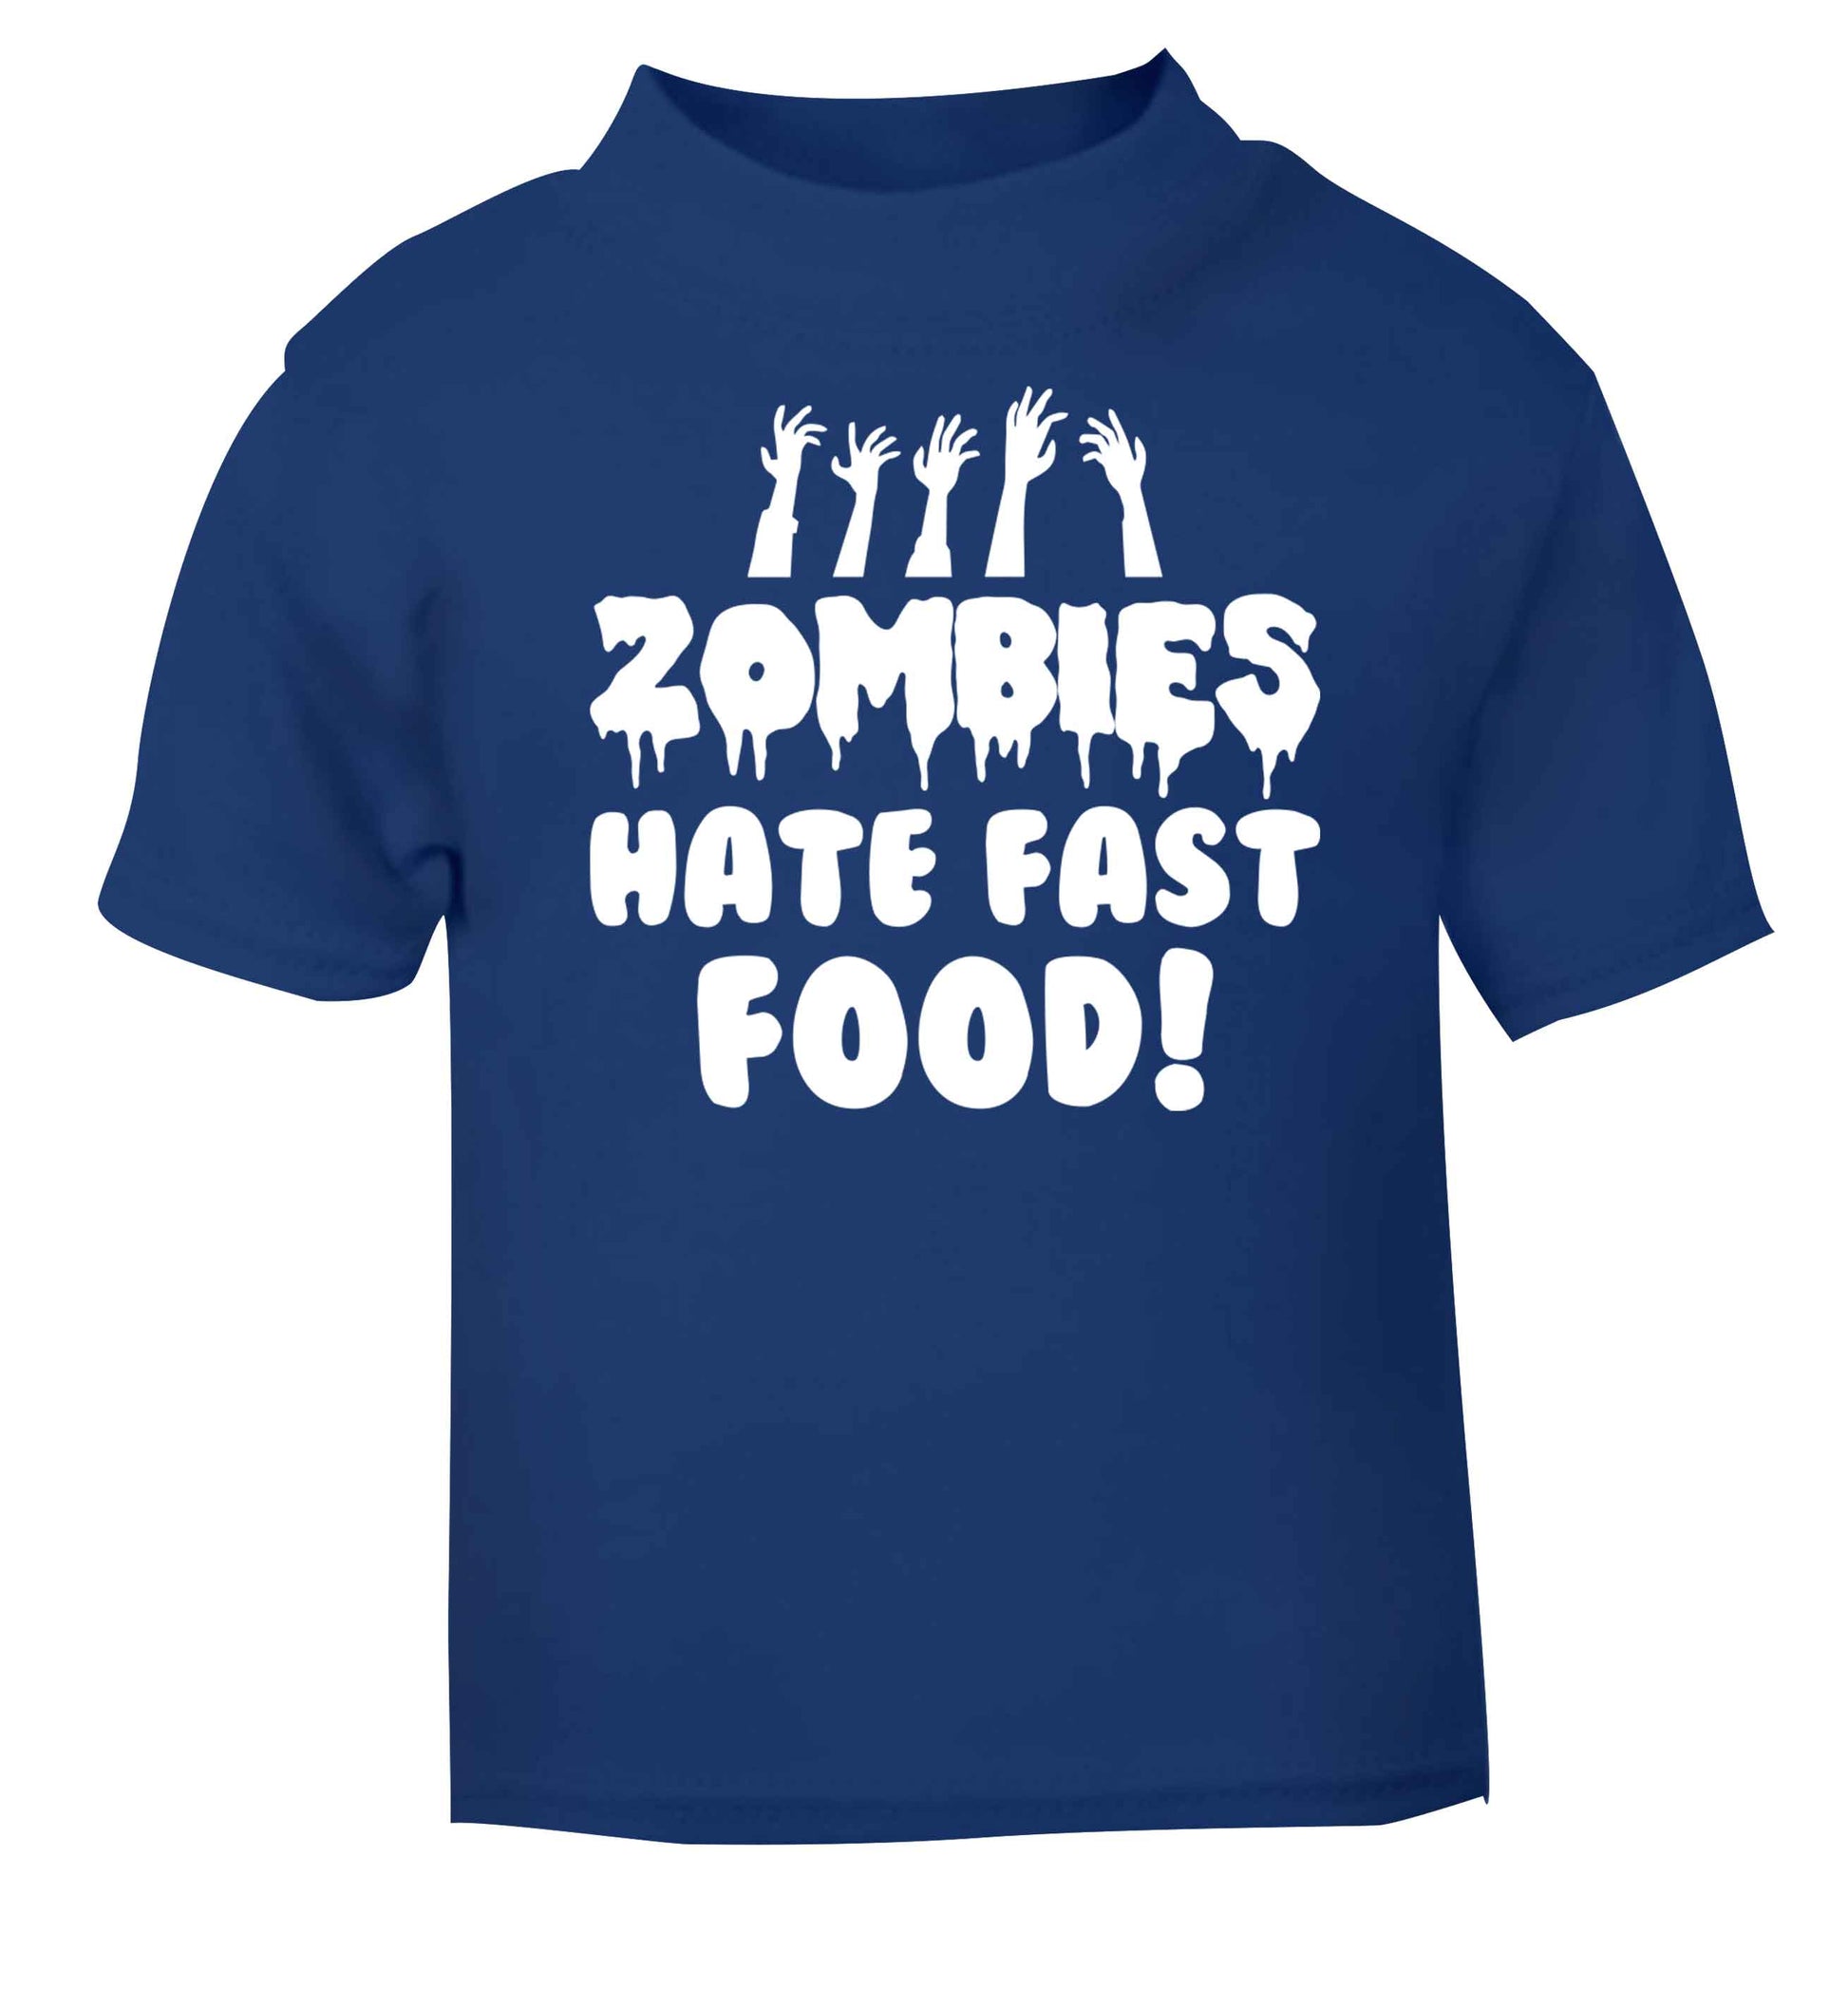 Zombies hate fast food blue baby toddler Tshirt 2 Years